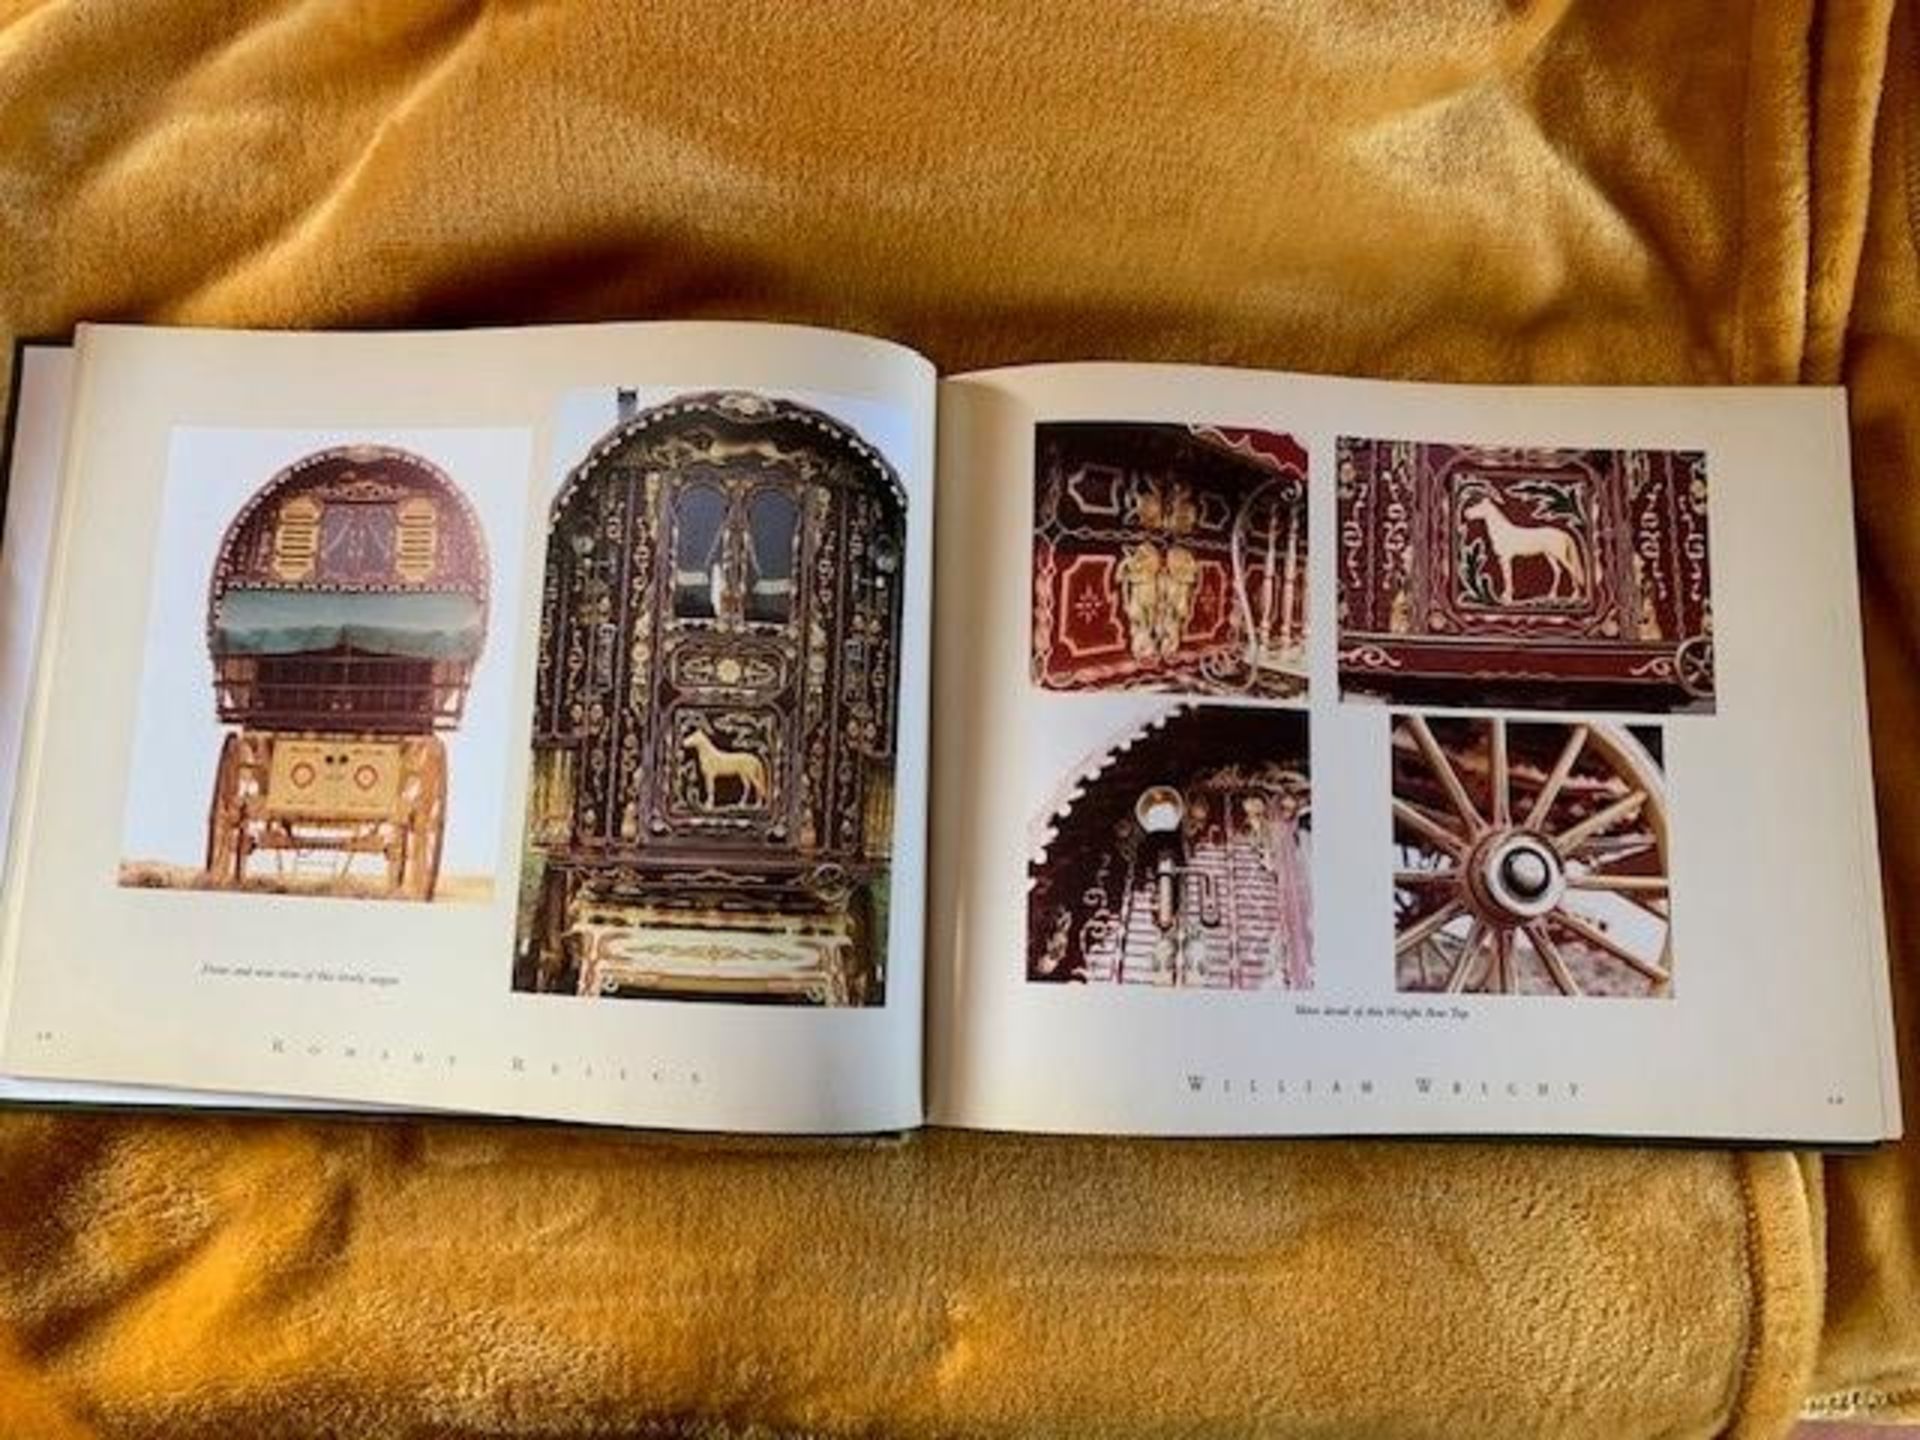 Romany Relics The Wagon Album', limited edition signed by John Barker and Peter Ingram Number 83/100 - Image 2 of 3